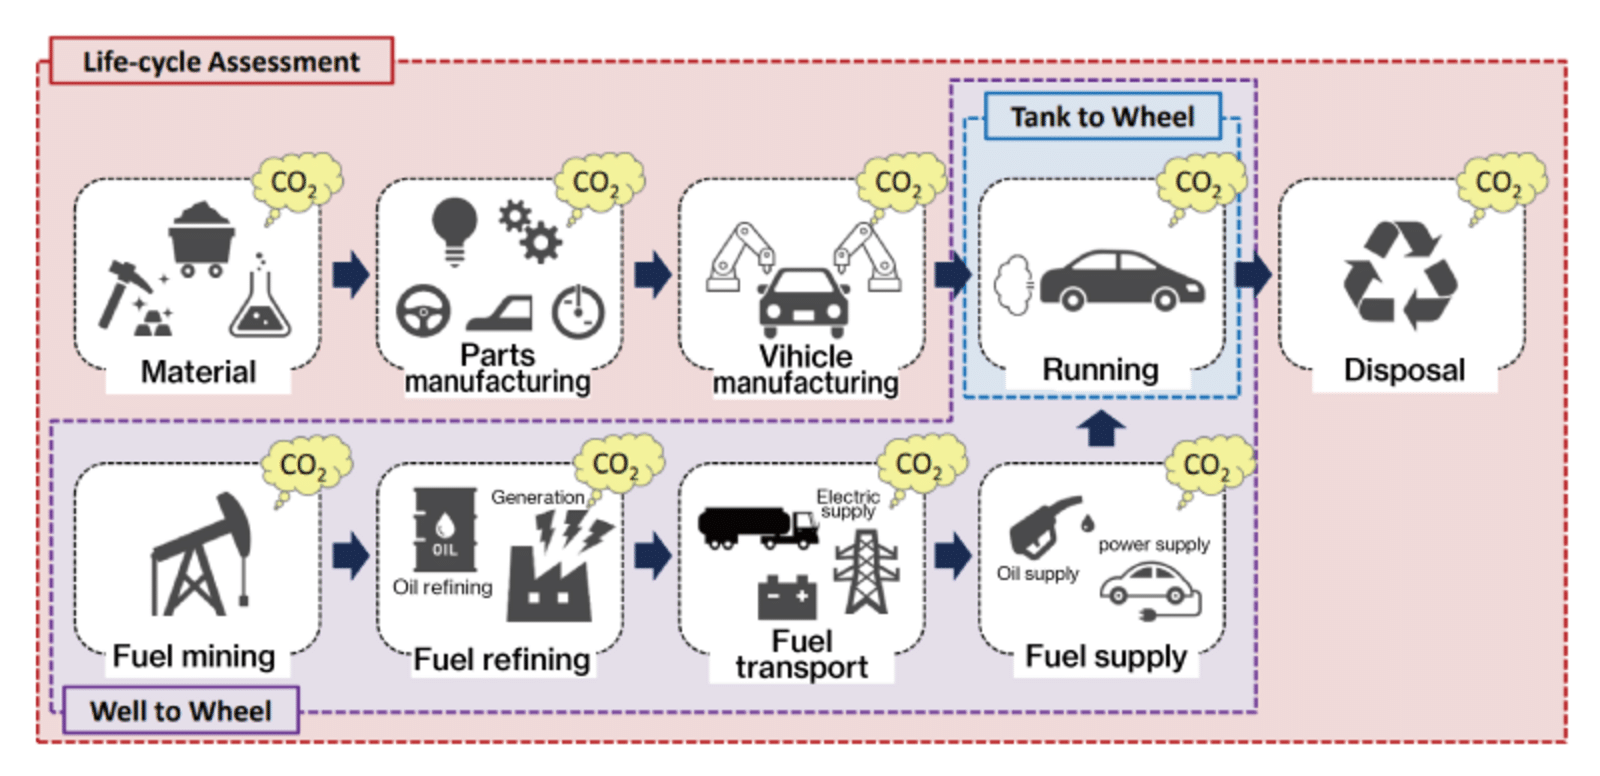 LCA example scope 3 emissions for automobile